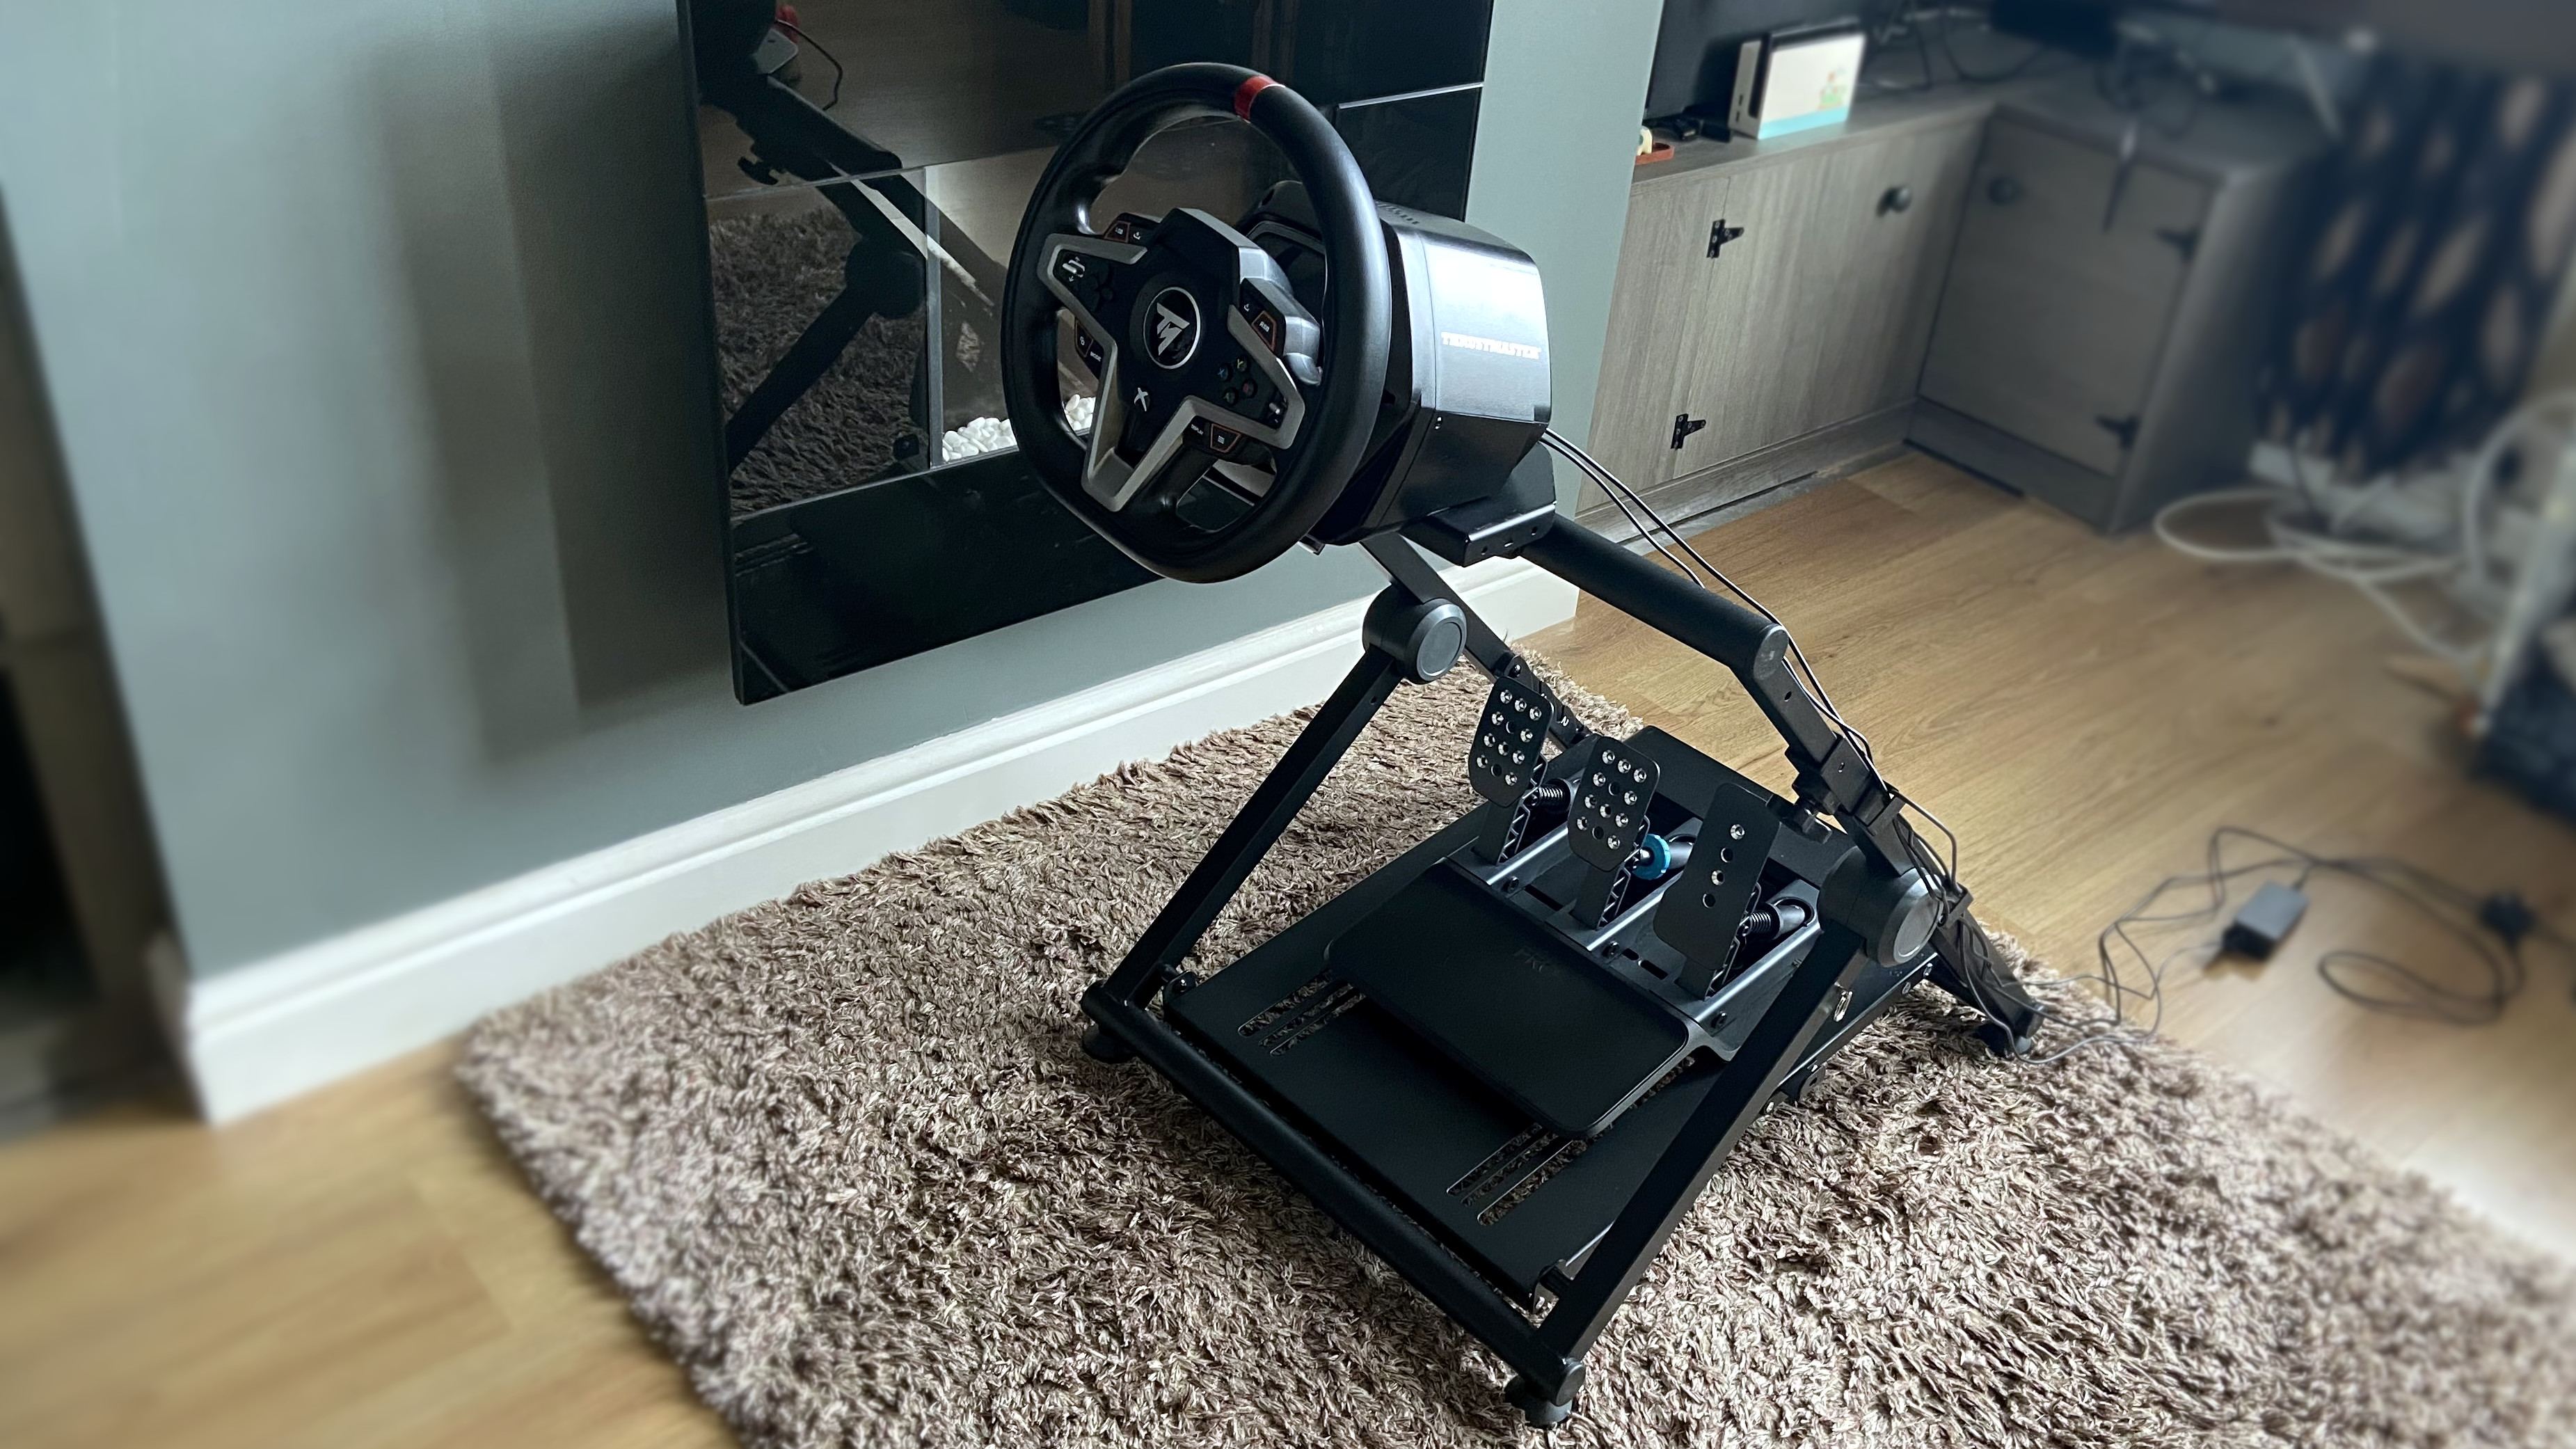 GT foldable racing stand fully assembled with a Thrustmaster T248X wheel and Logitech G PRO pedals.